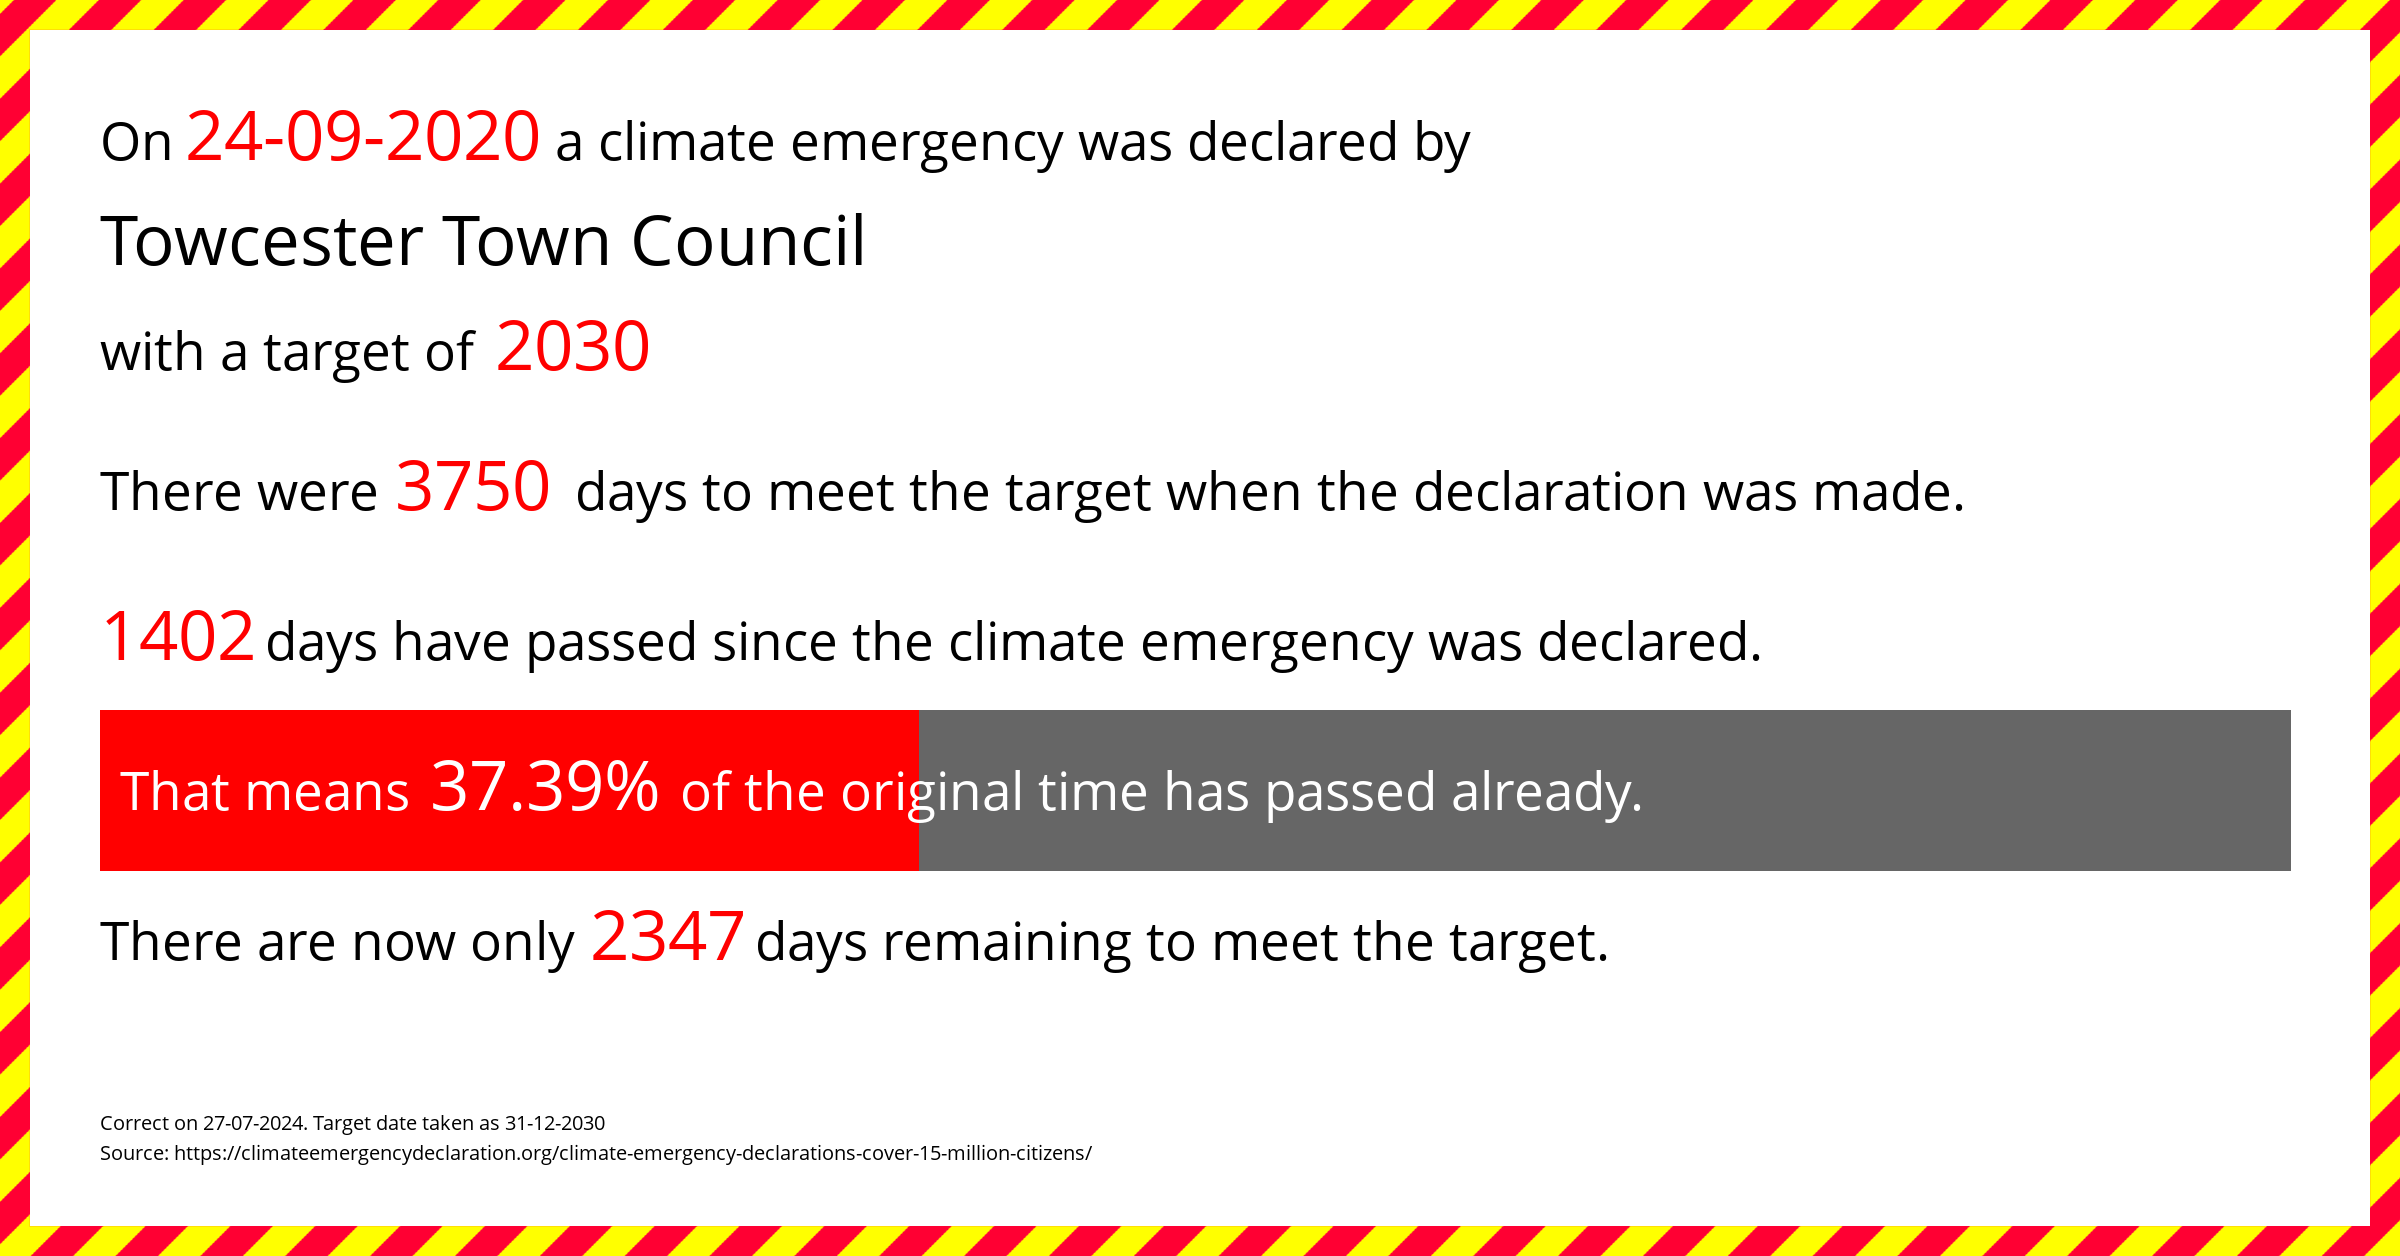 Towcester Town Council  declared a Climate emergency on Thursday 24th September 2020, with a target of 2030.